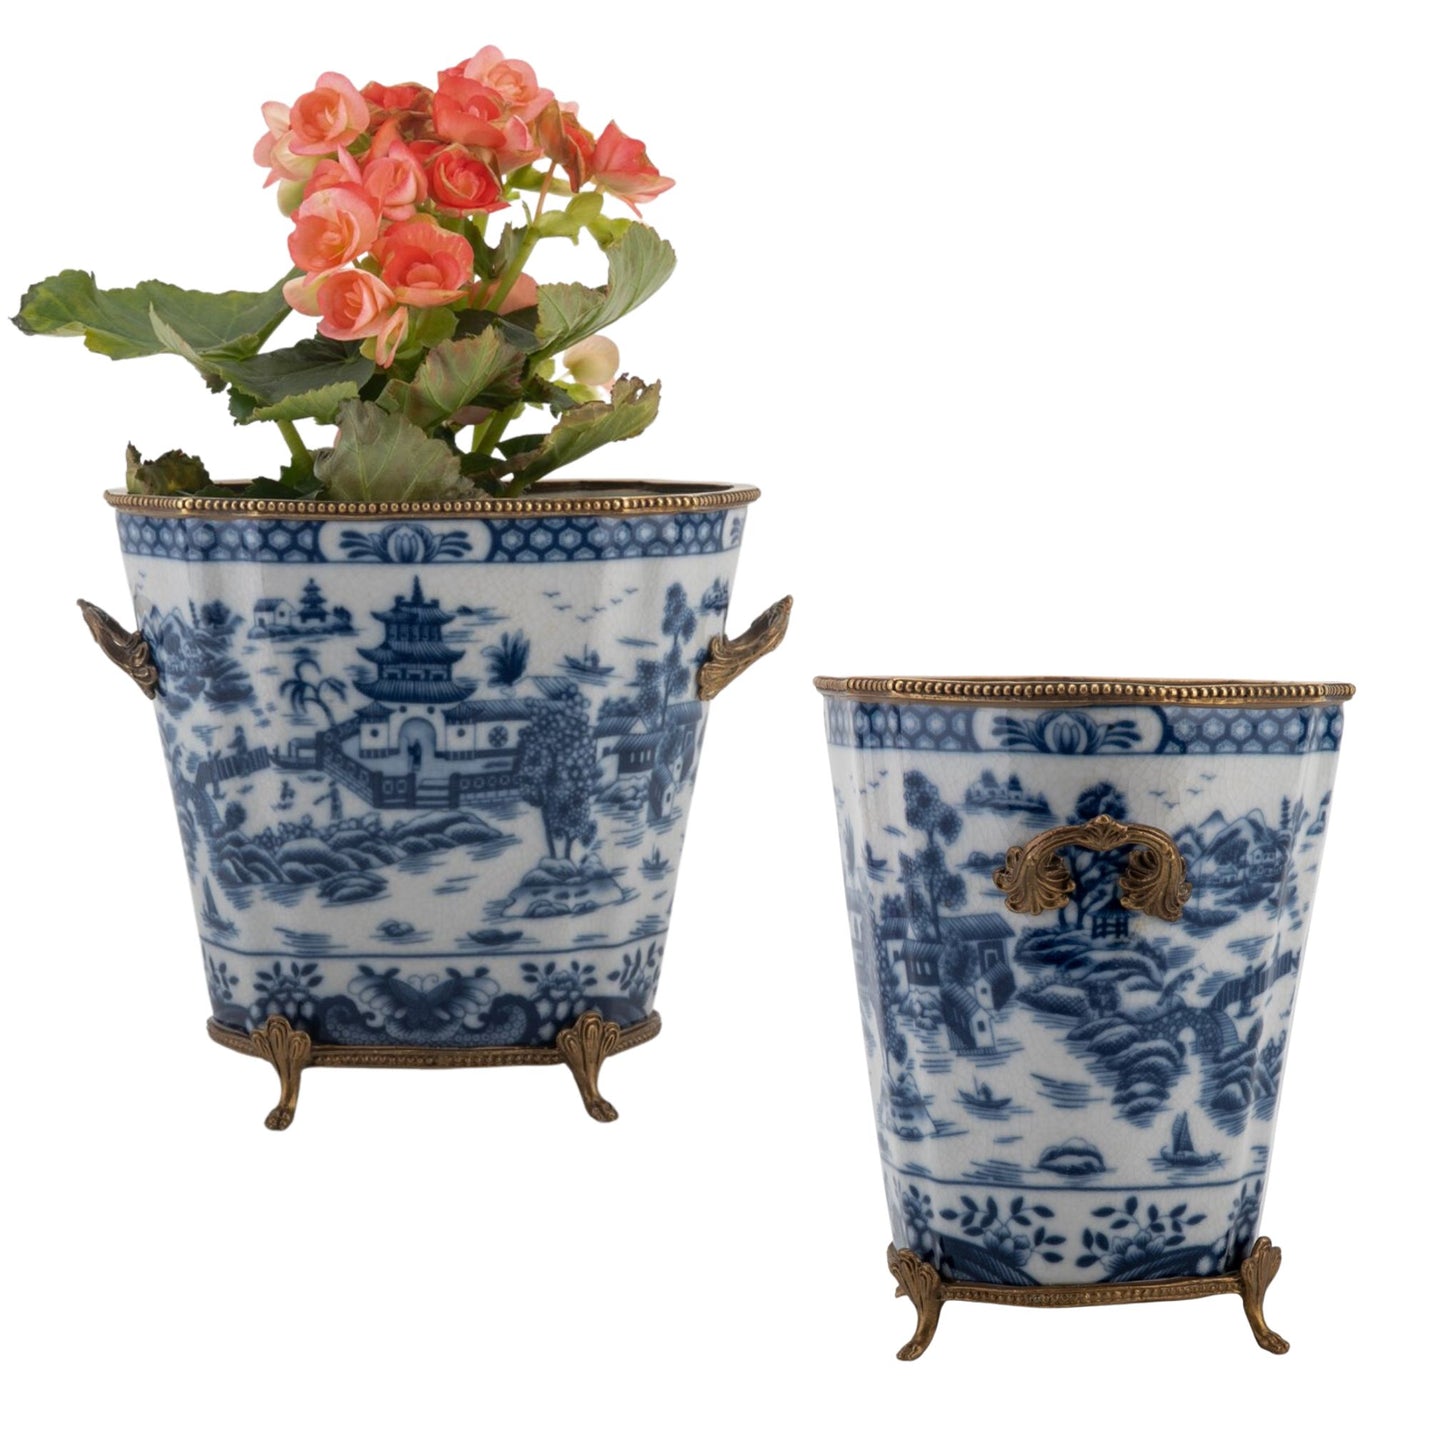 Blue & White Porcelain Planter W/ Bronze Footings & Details, 7.5" Tall